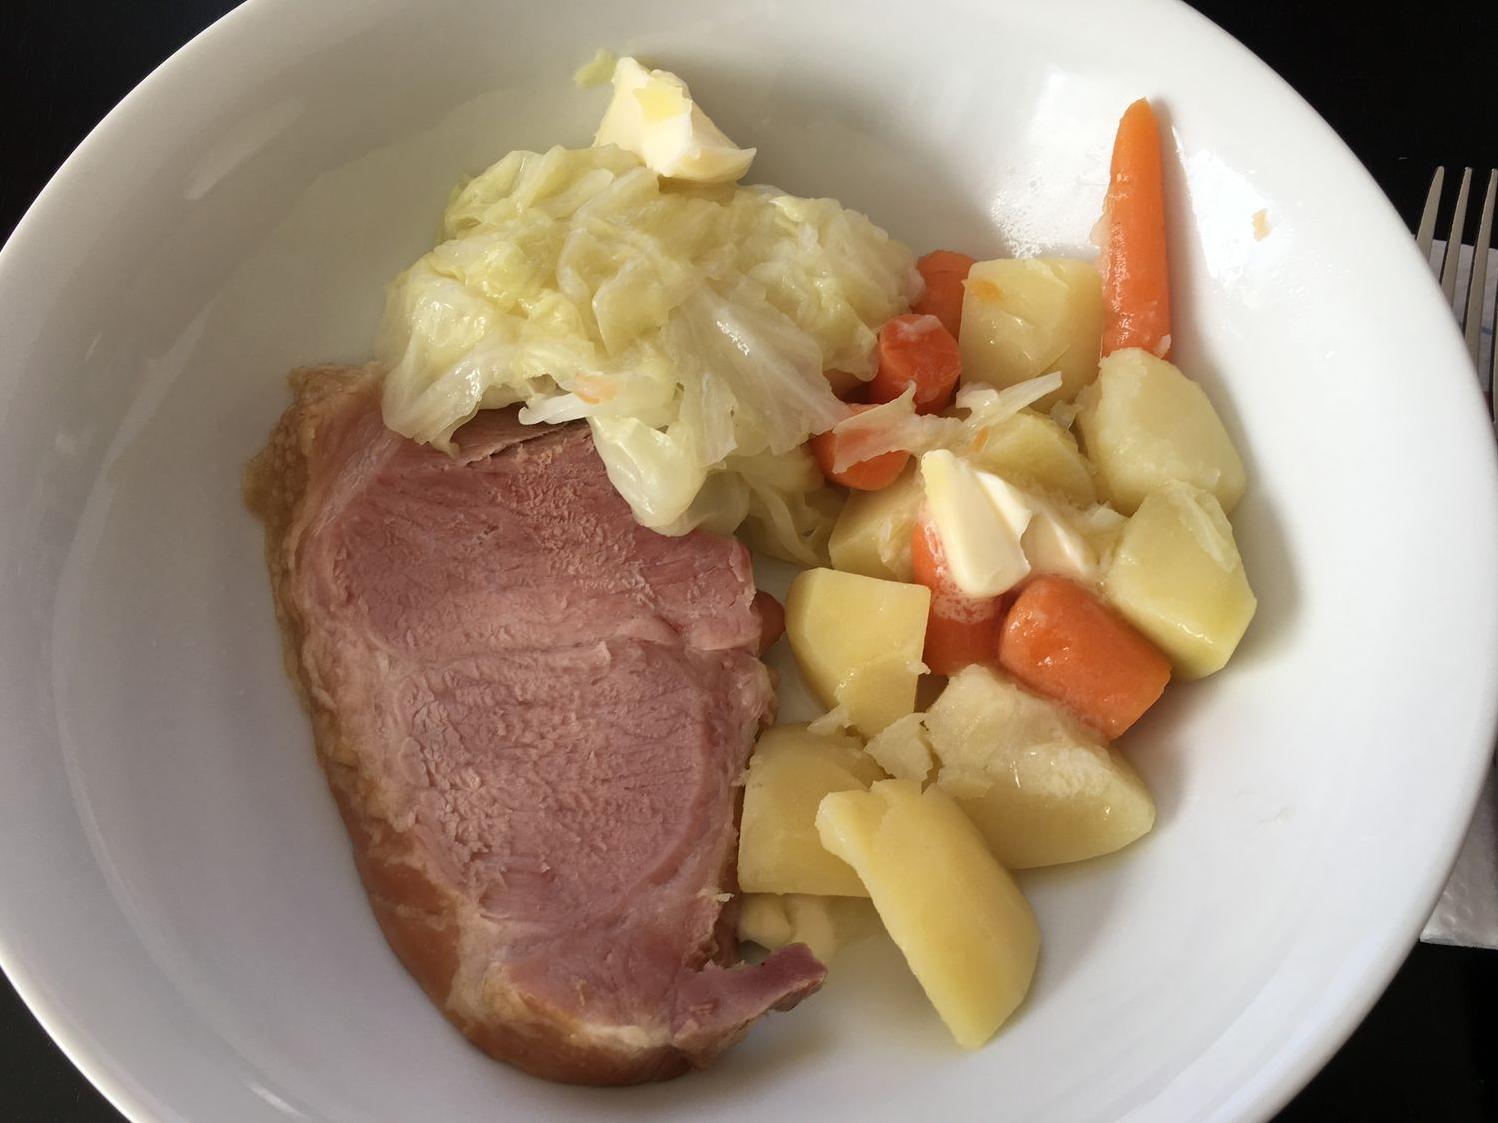  A traditional Irish meal that will warm your soul